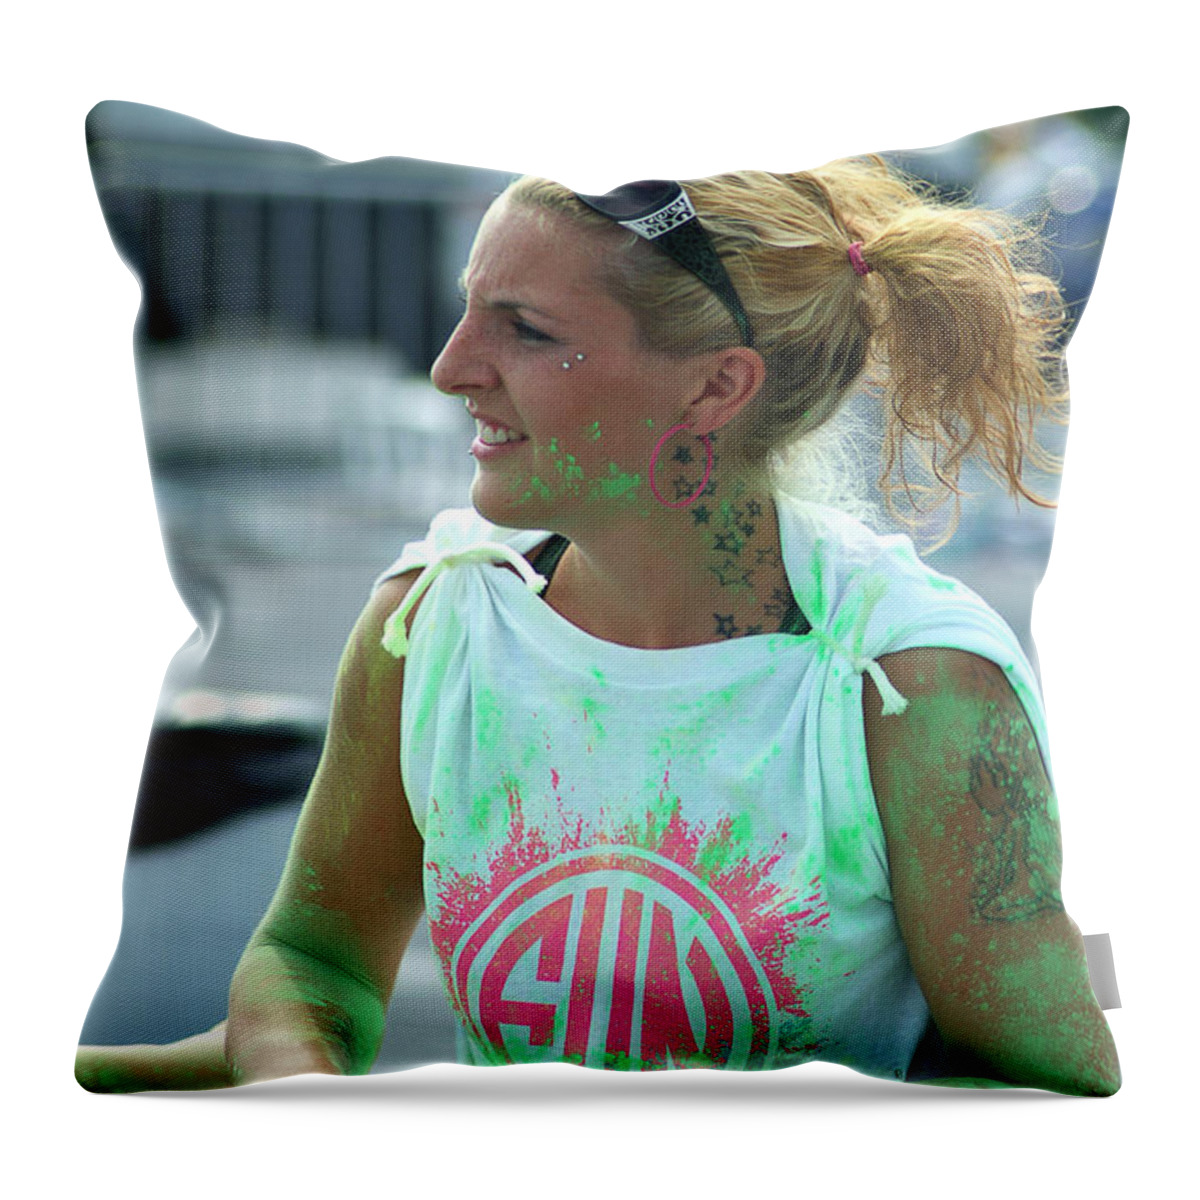  Throw Pillow featuring the photograph 5K Color Run by Michael Dorn